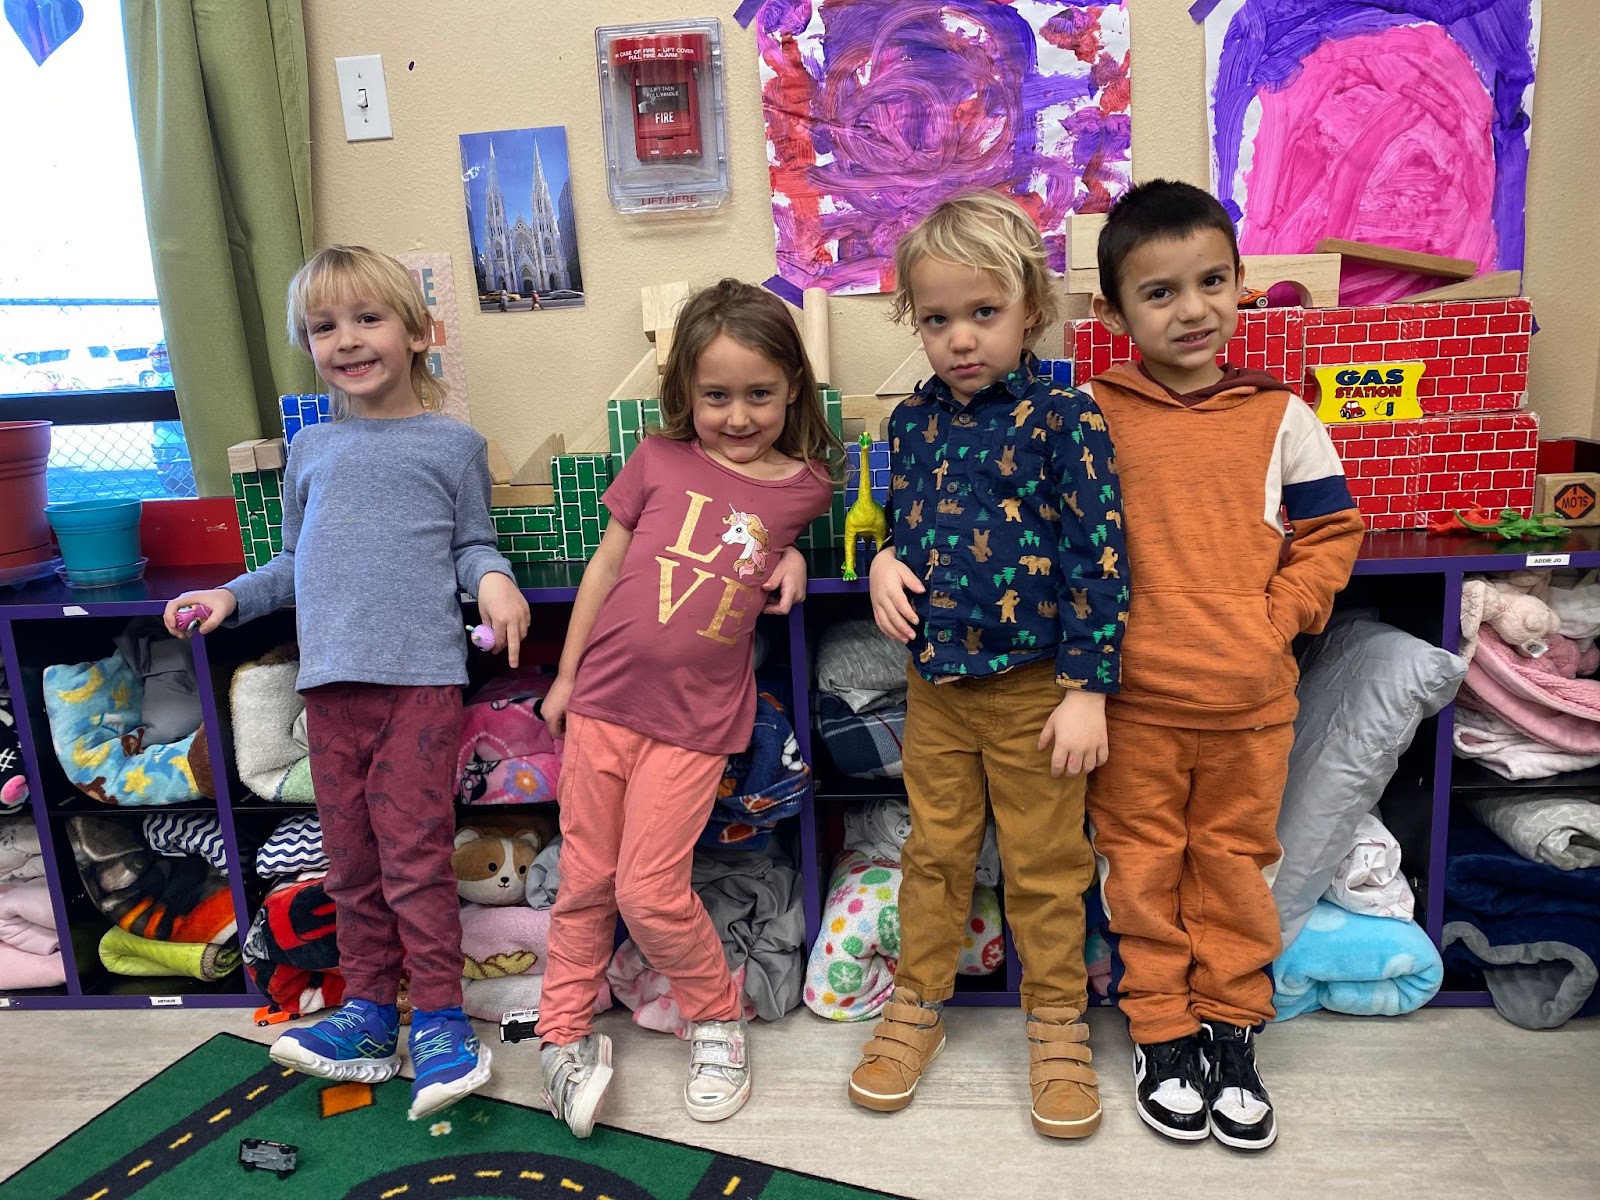 Four preschoolers smile at the camera while standing in front of artwork and naptime supplies.